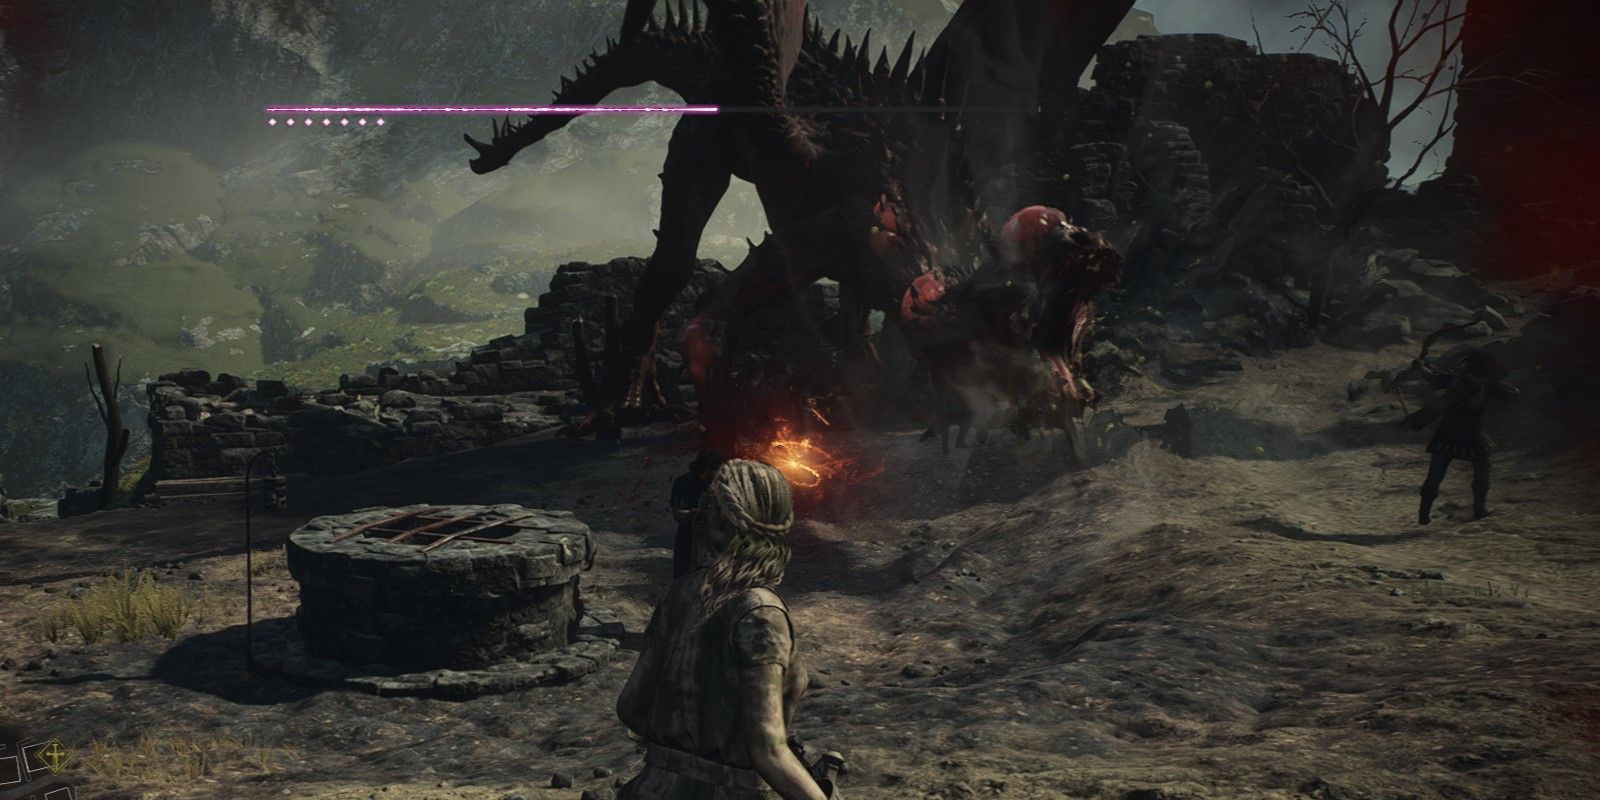 The Dragon's Dogma 2 character arrived in Melve to deliver a letter to Lennart but is up against an unexpected dragon.